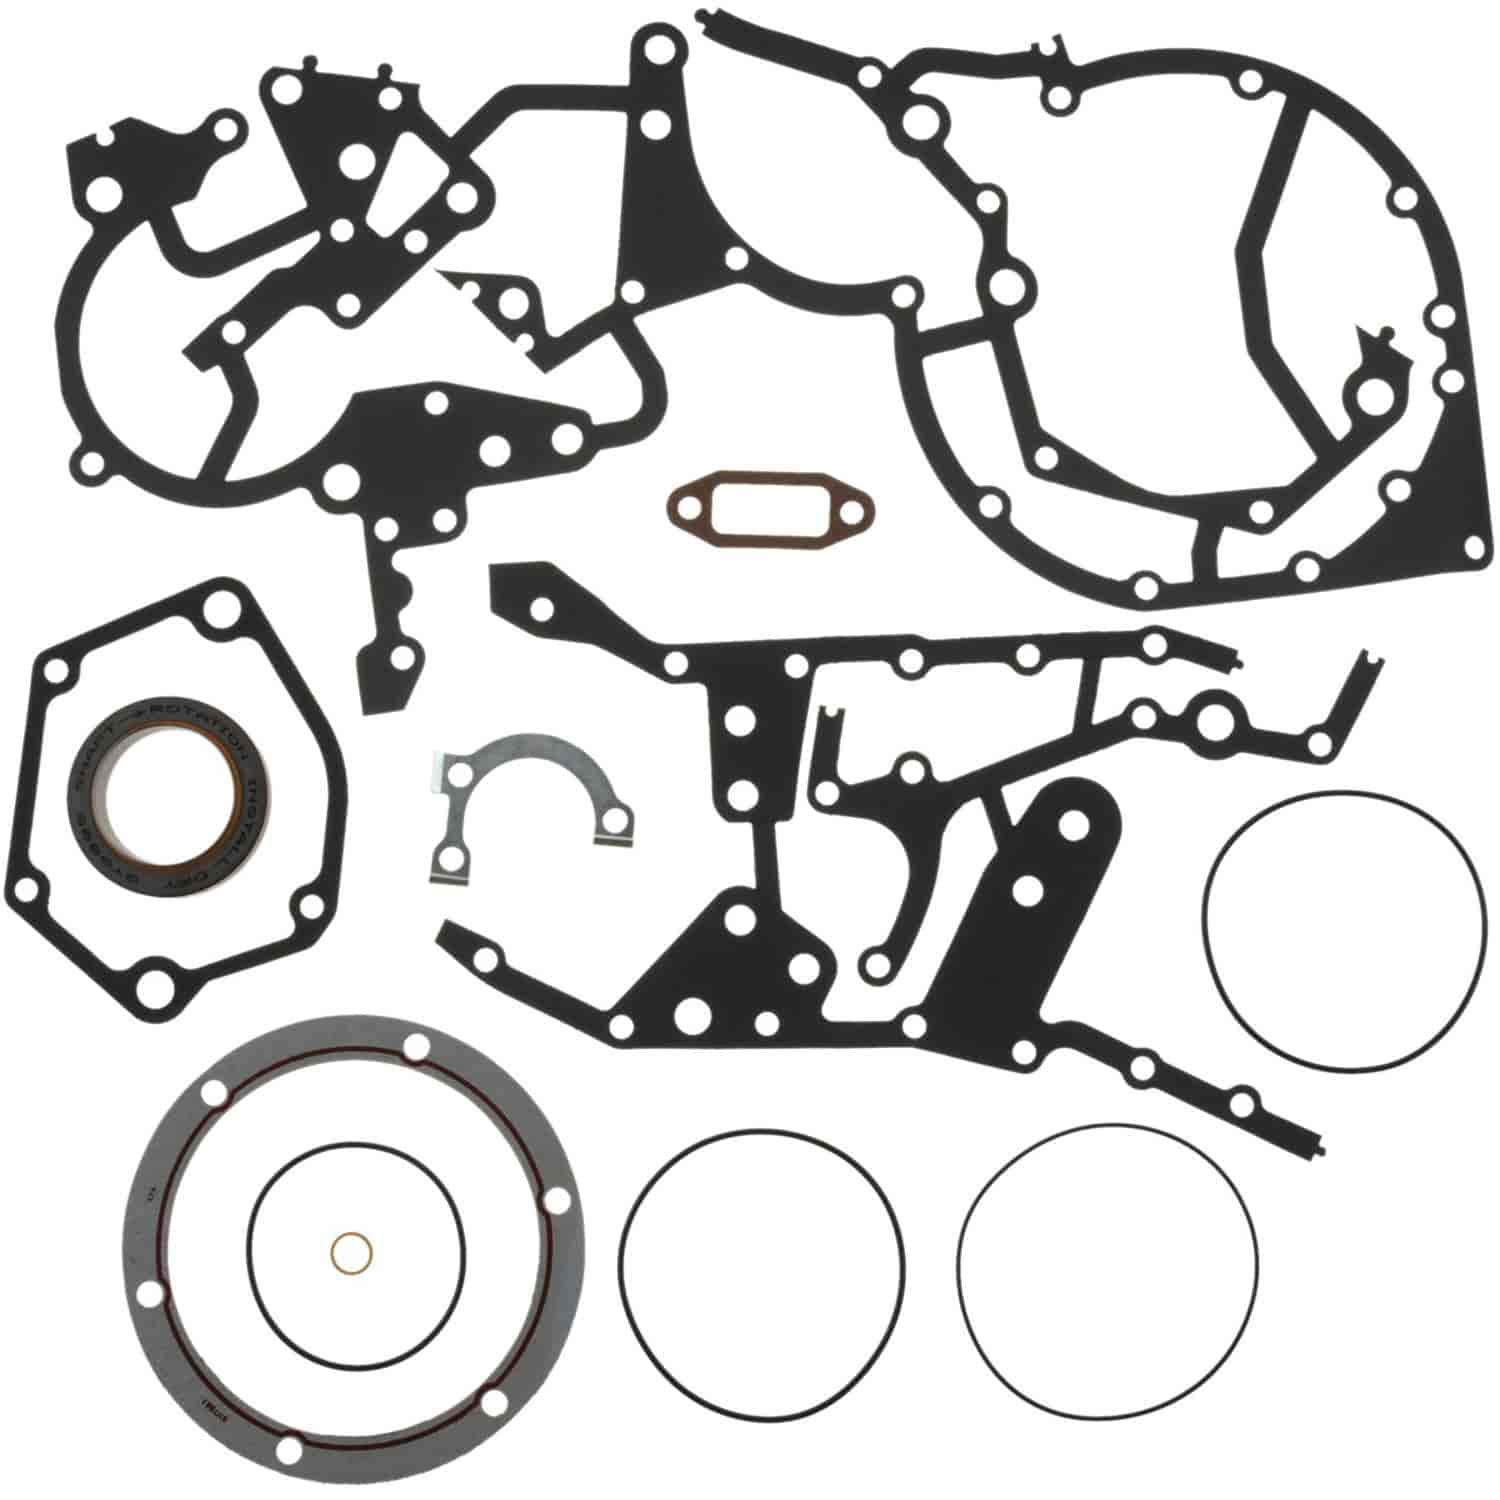 Timing Cover Set Caterpillar 3304 and 3306 Timing Cover Set